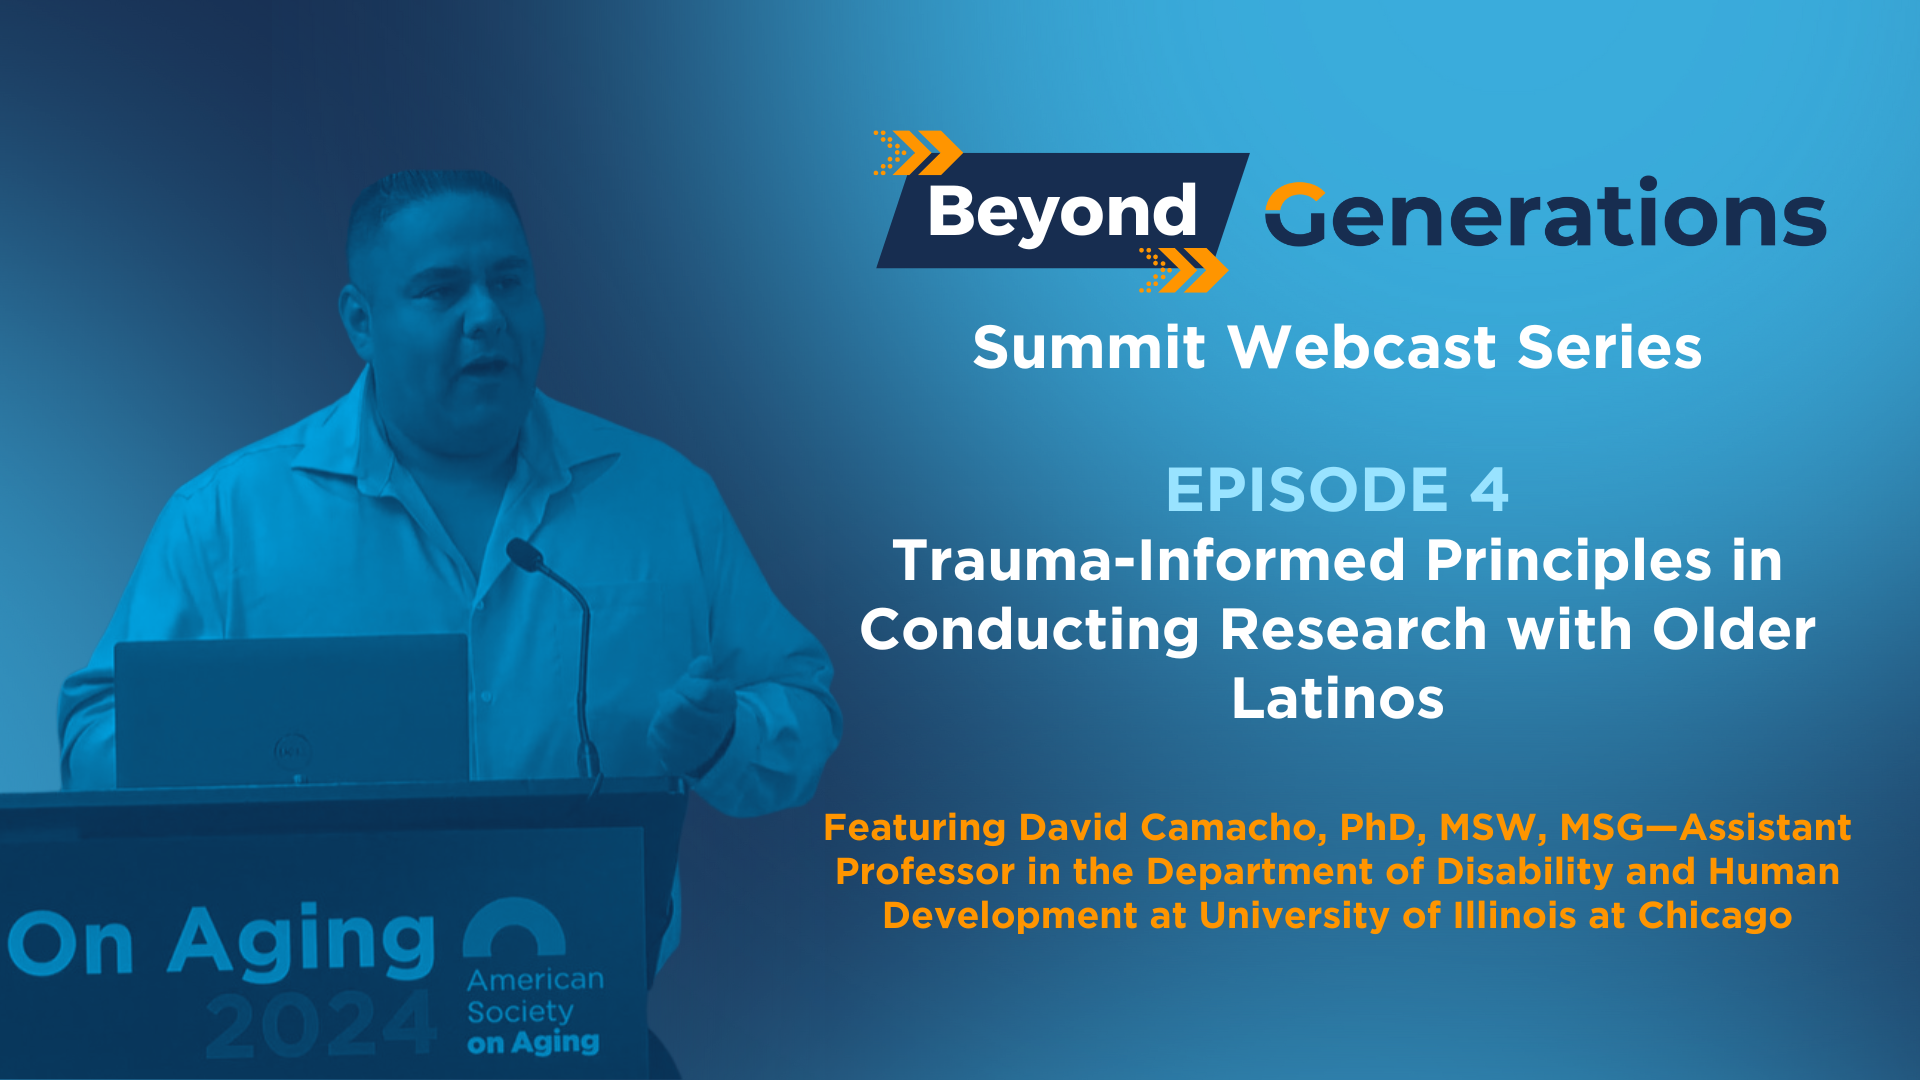 Episode 4: Trauma-Informed Principles in Conducting Research with Older Latinos